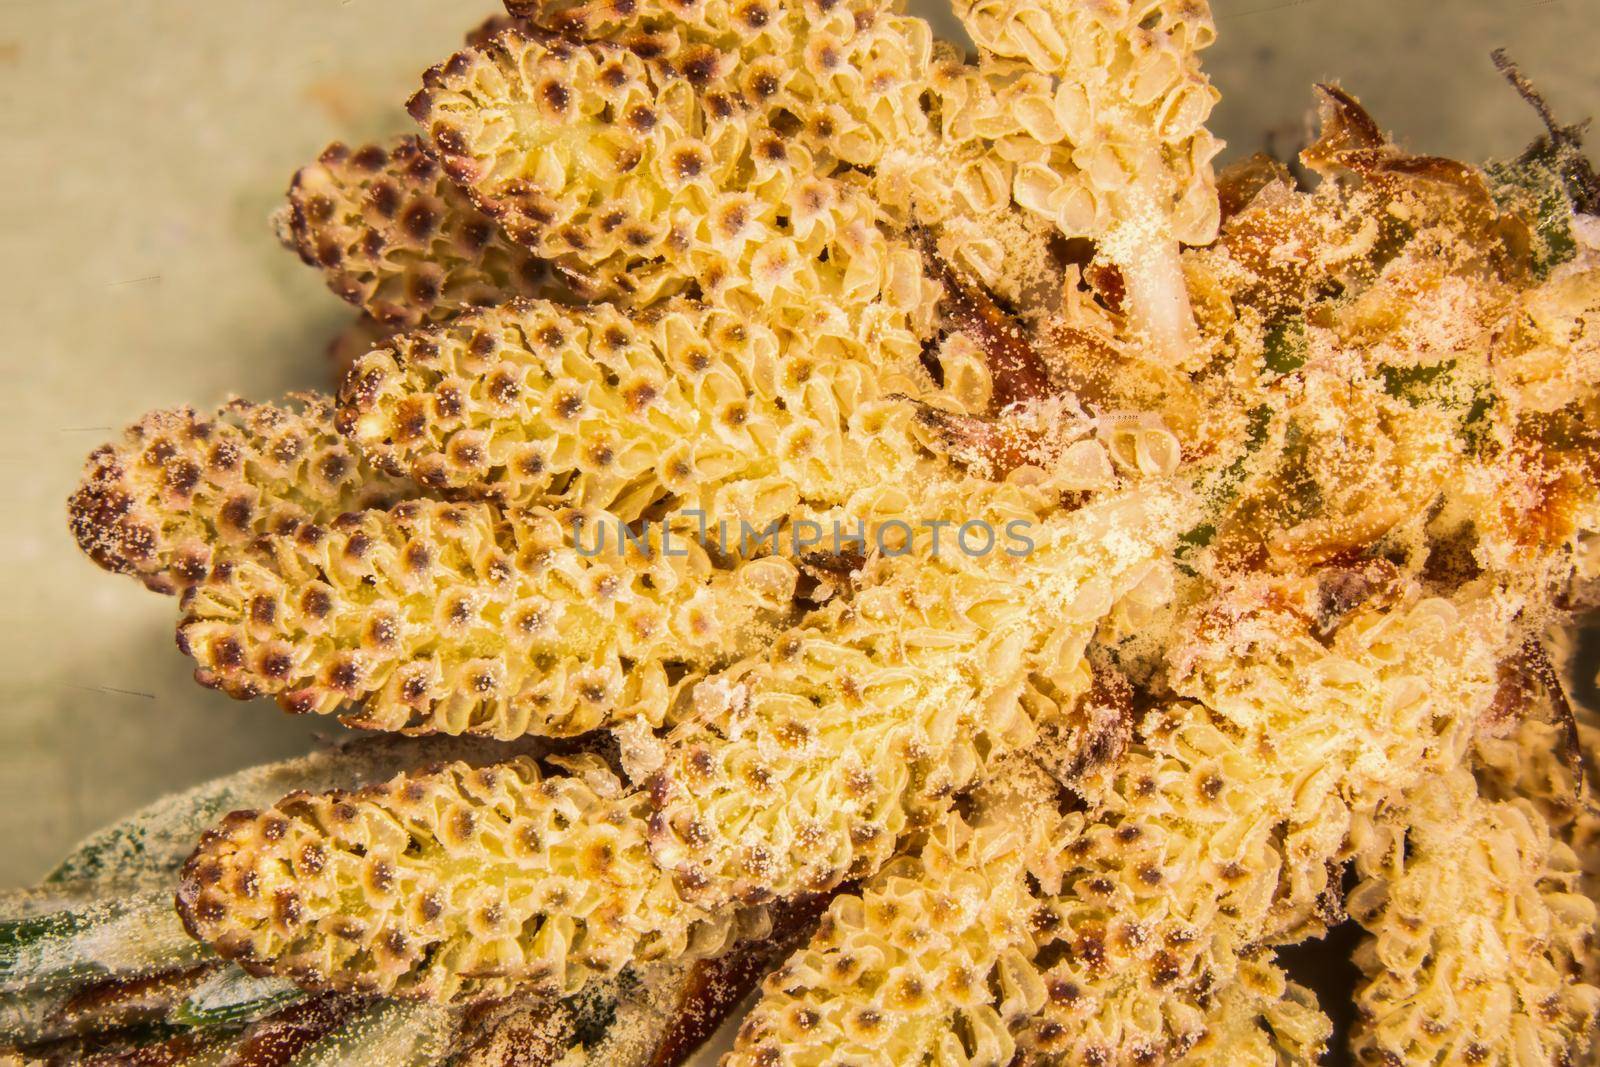 Infructescence of the pine with yellow pollen